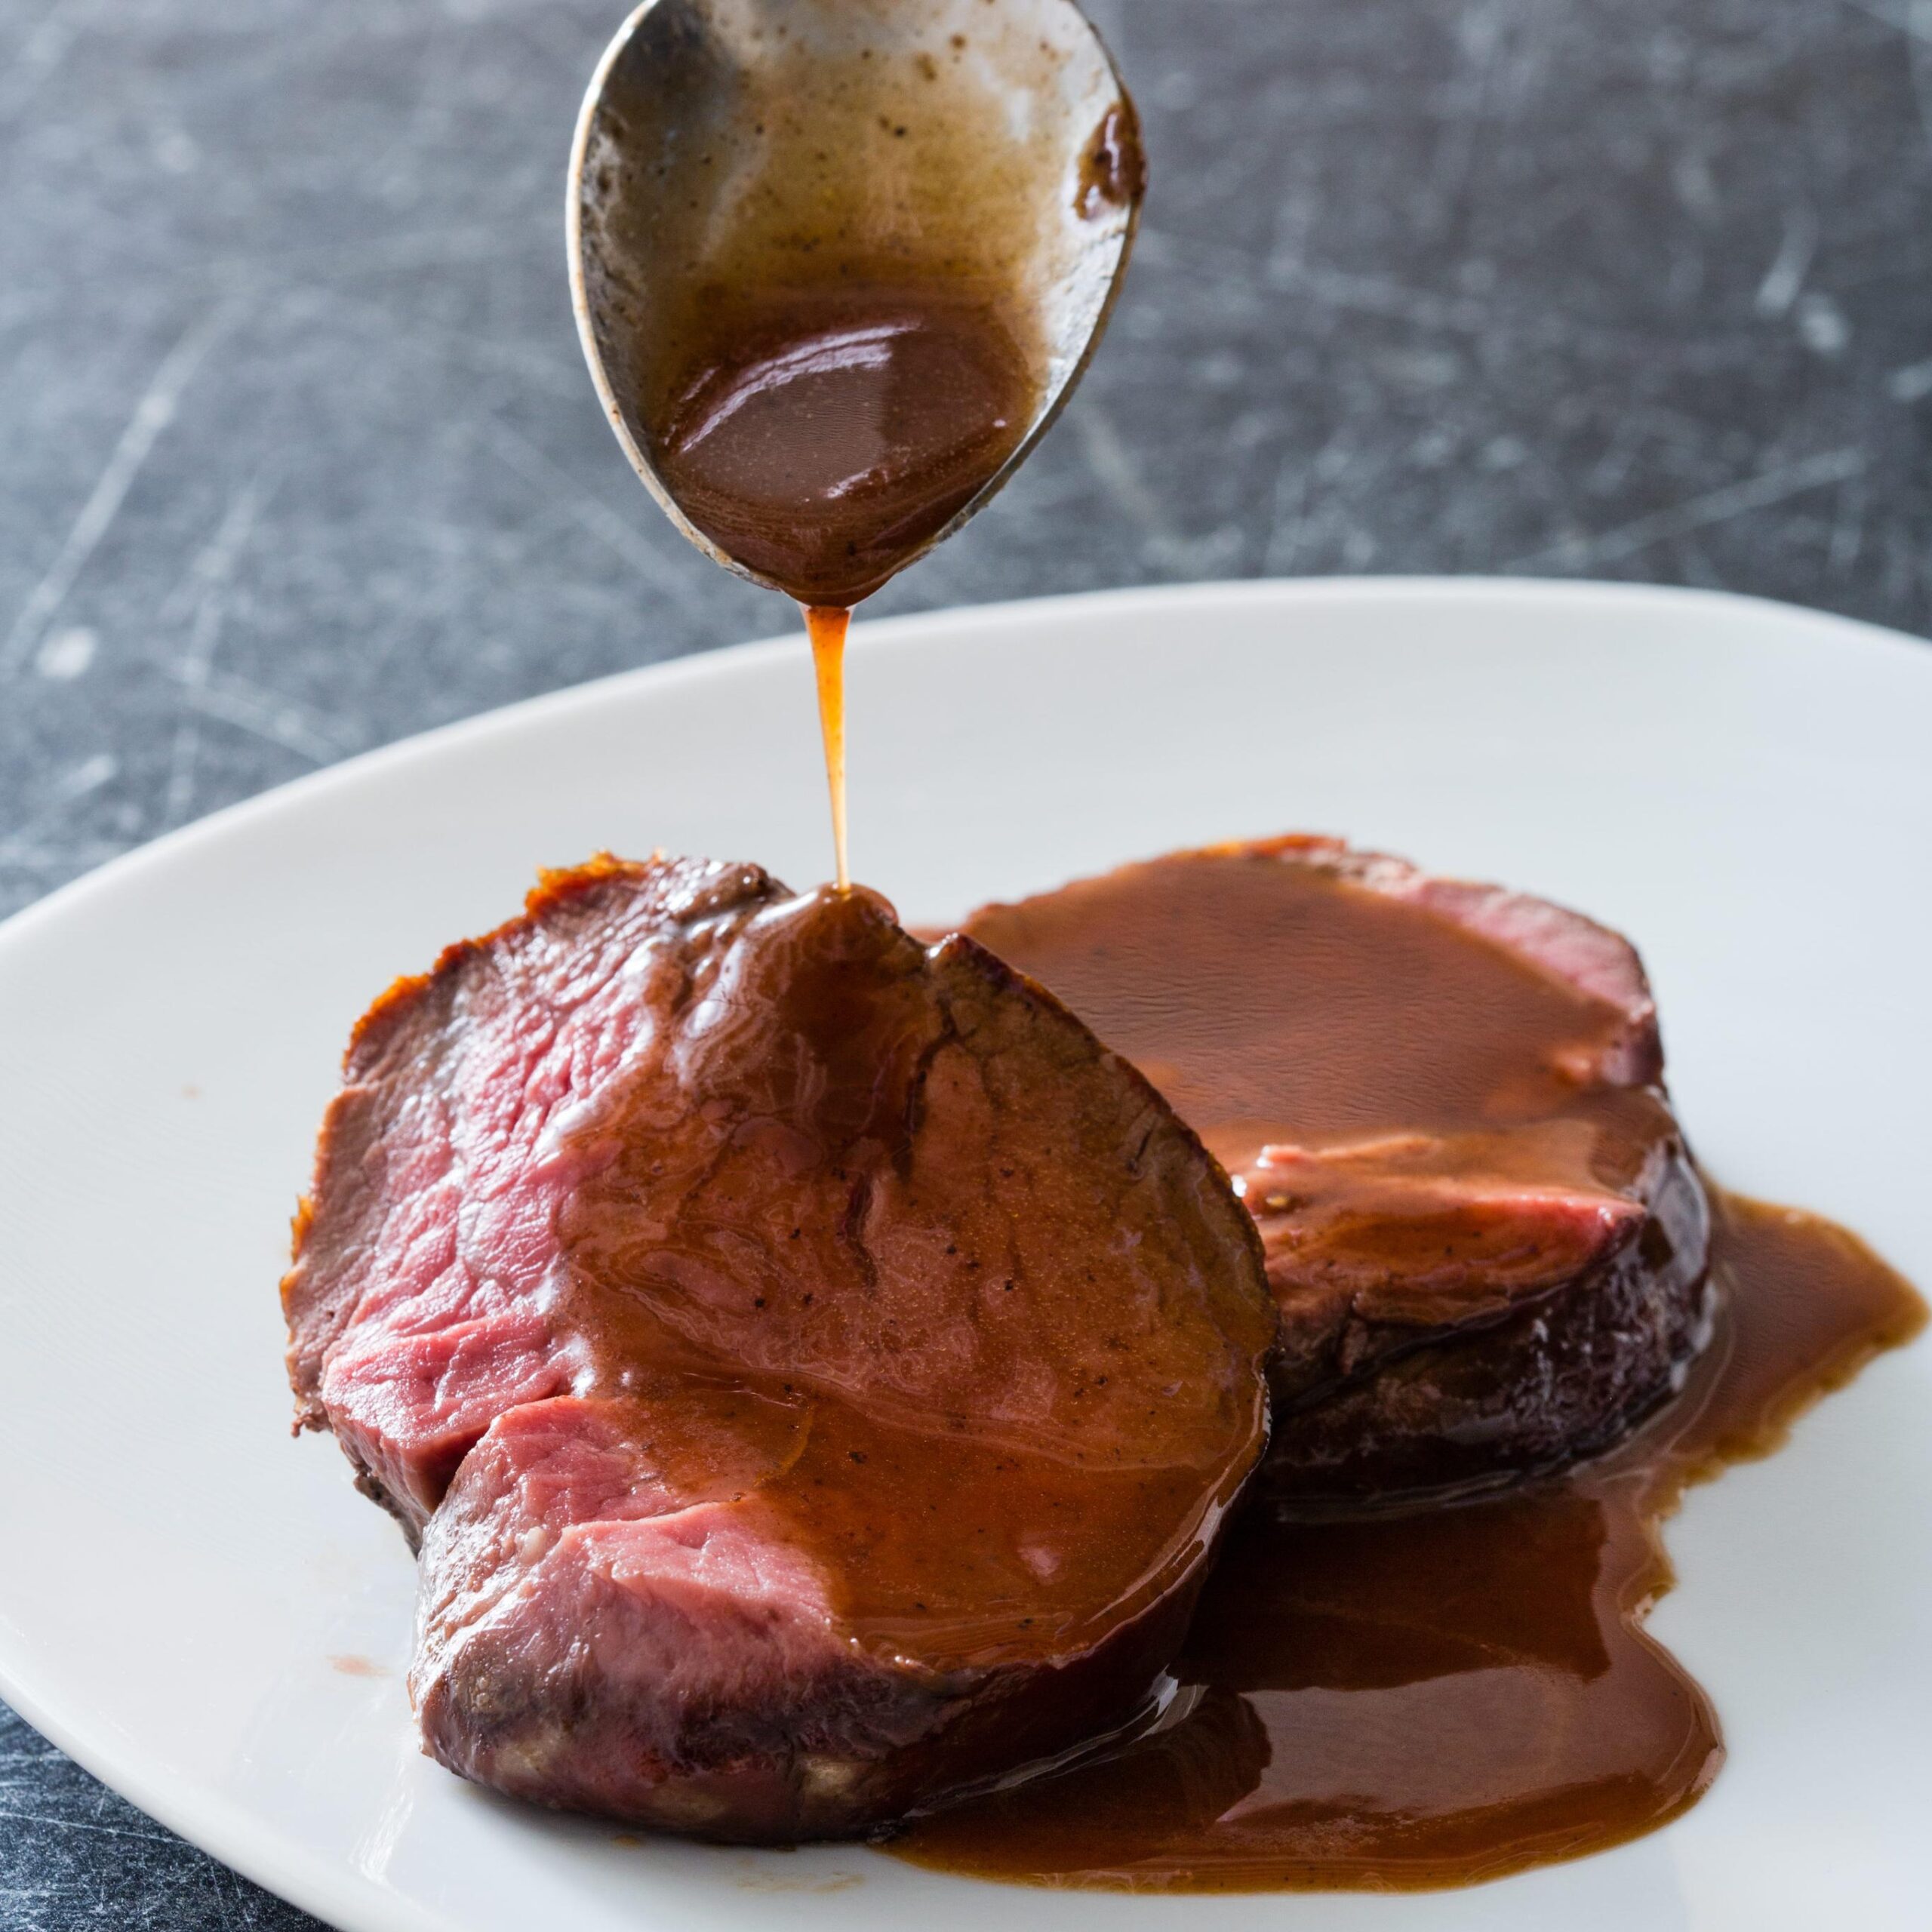  The beef tenderloin may steal the show, but the red wine sauce is the real star of this dish.